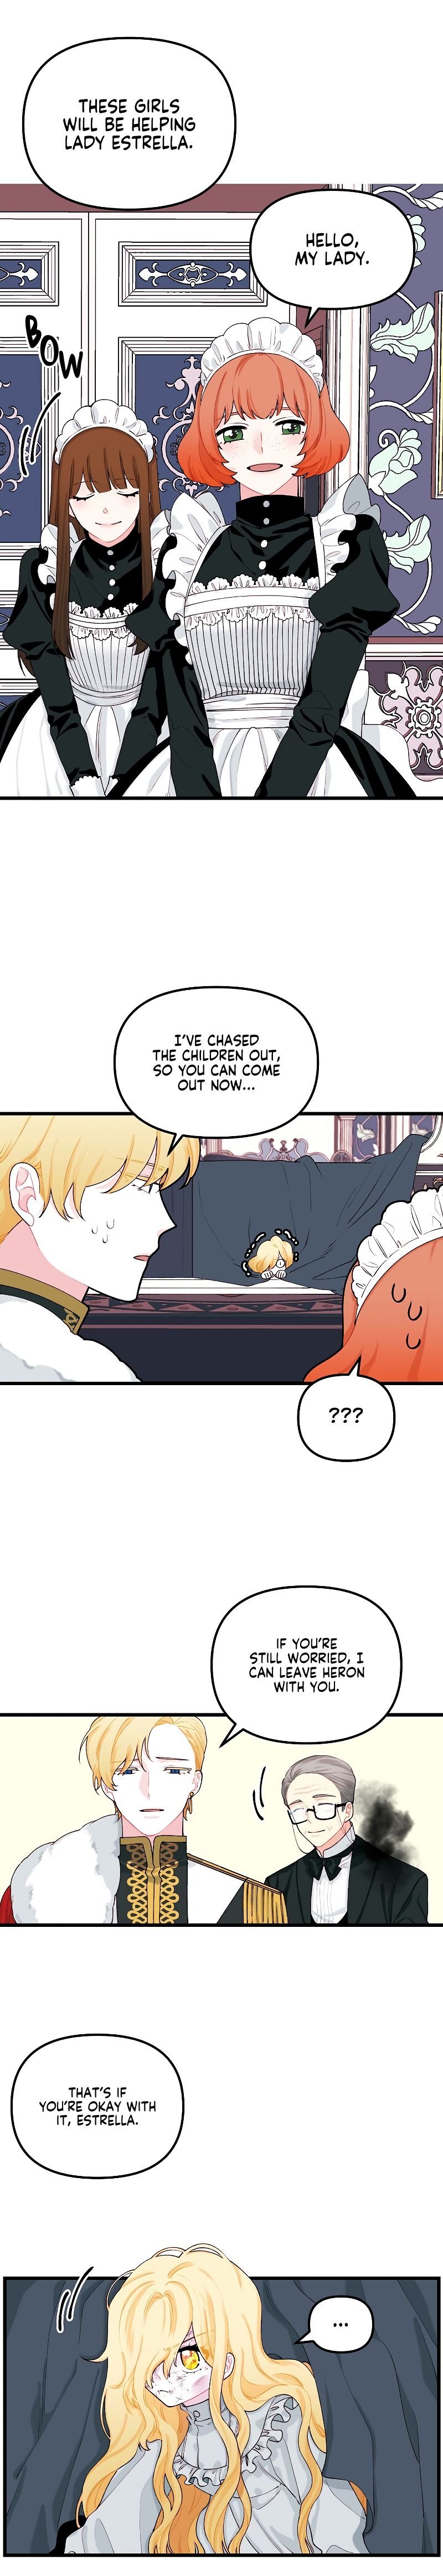 the-princess-in-the-dumpster-chap-9-1